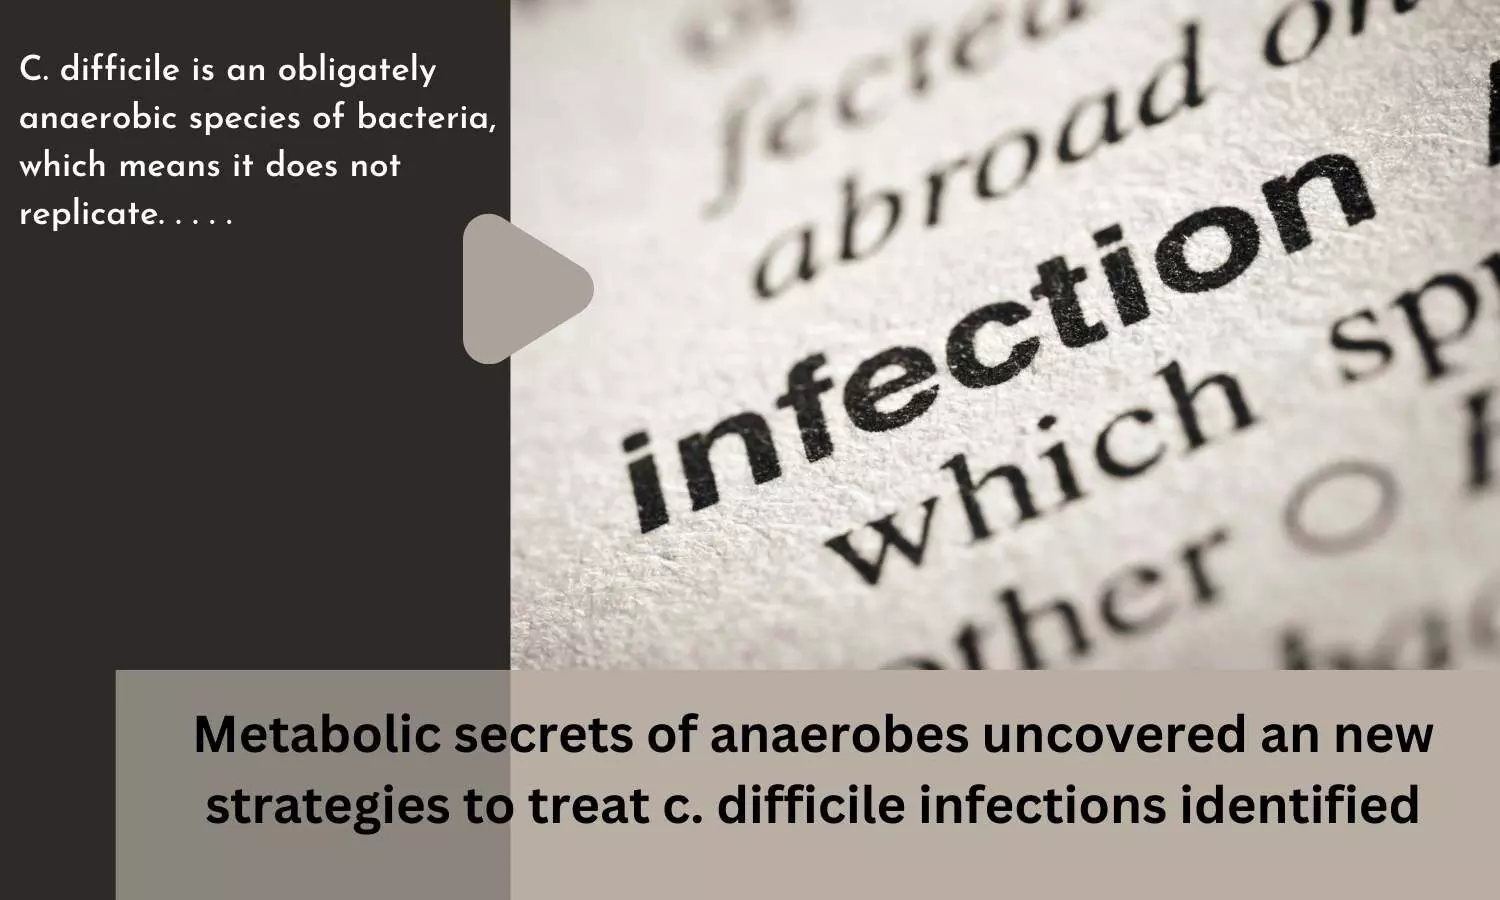 Metabolic secrets of anaerobes uncovered an new strategies to treat c. difficile infections identified